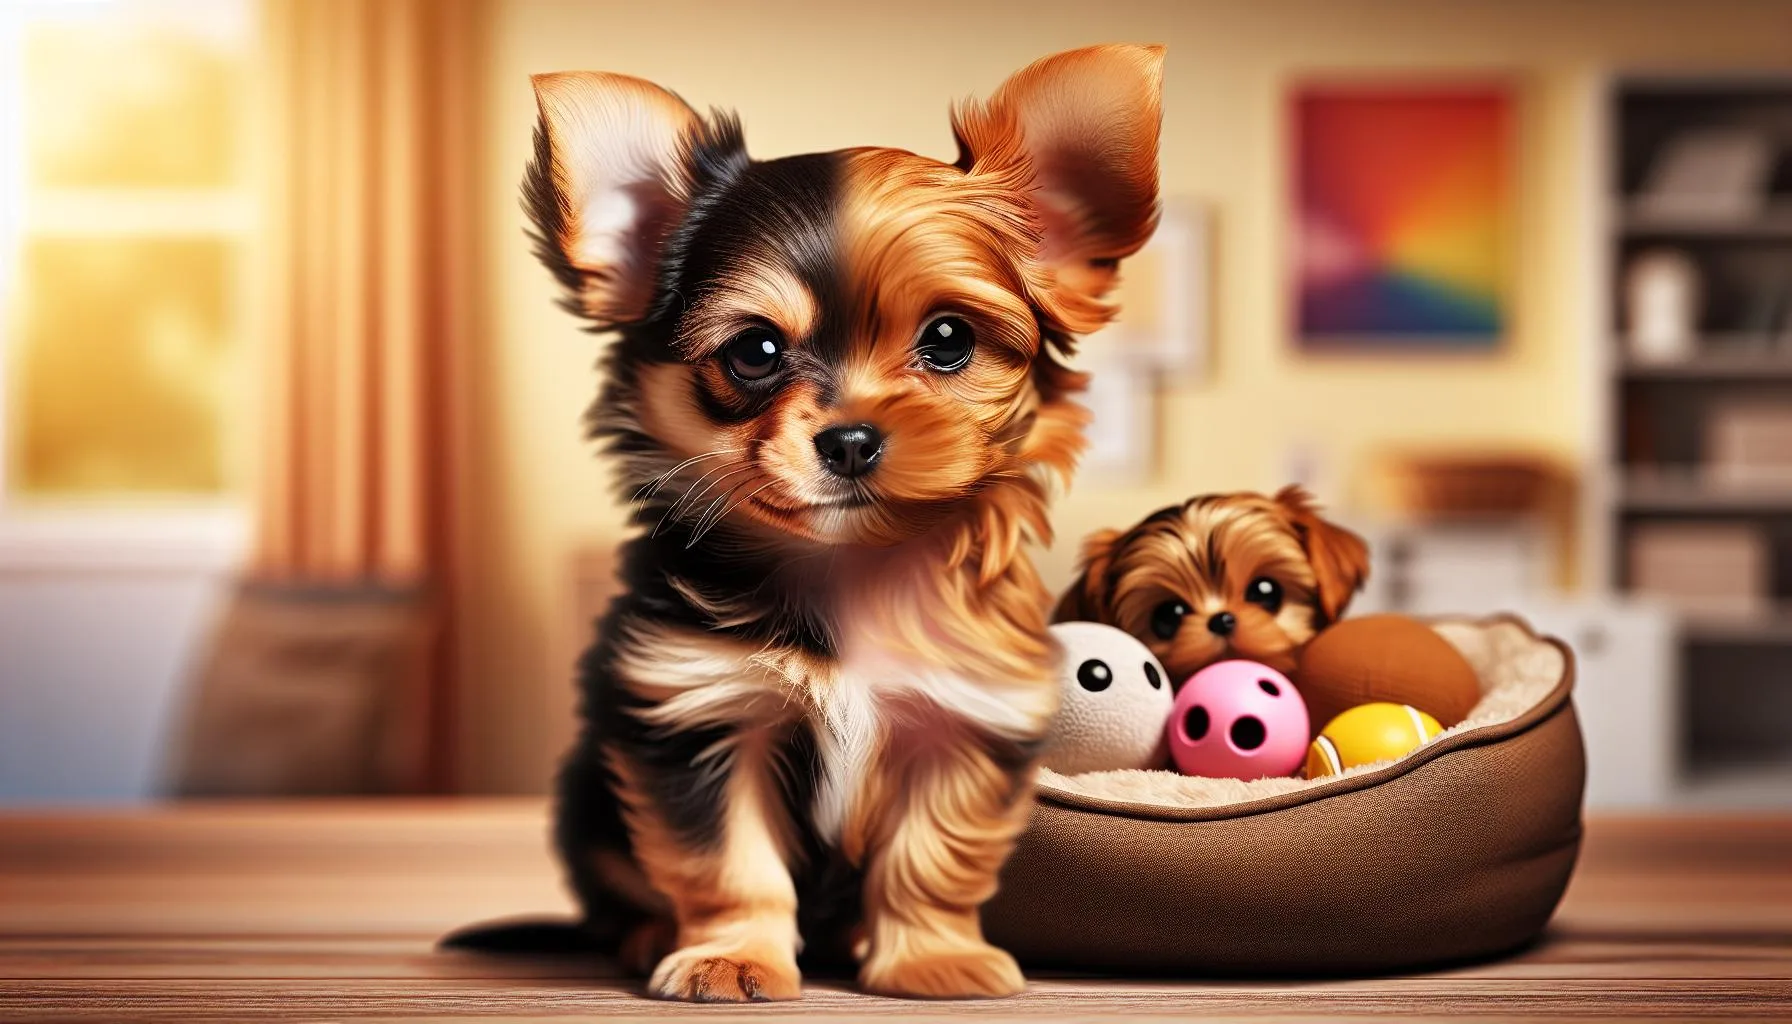 Chihuahua and Yorkie Mix Puppy: Meet Your New Pal!